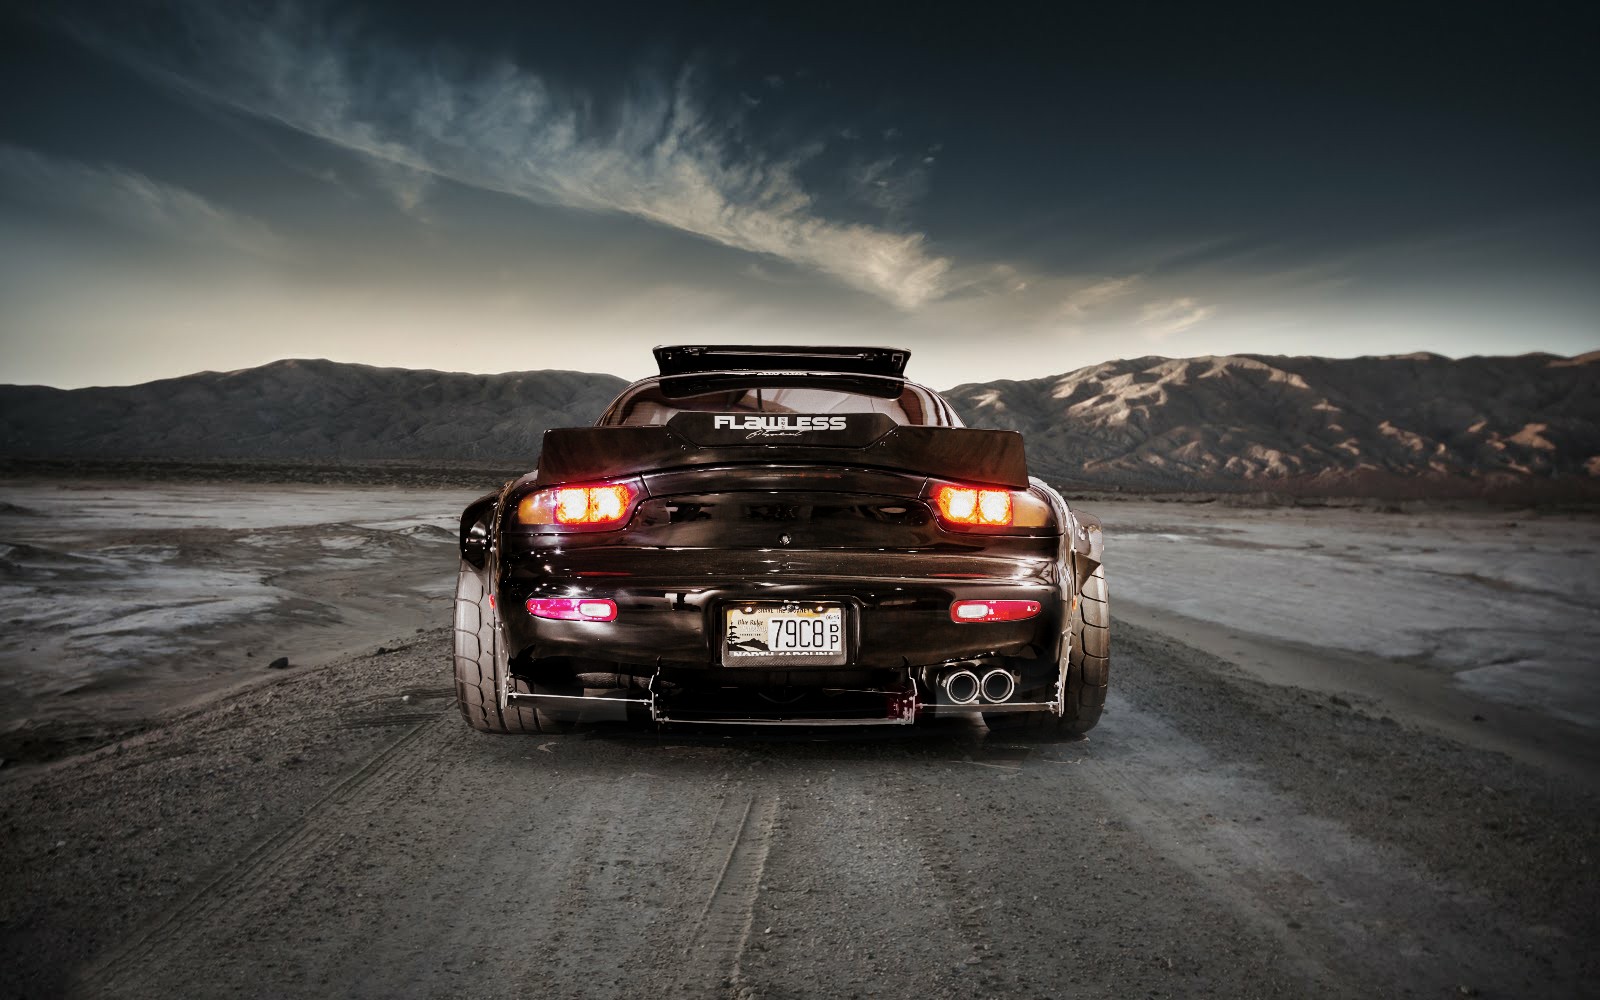 Free Download Gallery For Gt Mazda Rx7 Wallpaper 1600x1000 For Your Desktop Mobile Tablet Explore 70 Mazda Rx7 Wallpaper Rx 7 Wallpaper Mazda Cx 5 Wallpaper Mad Mike Rx7 Wallpaper